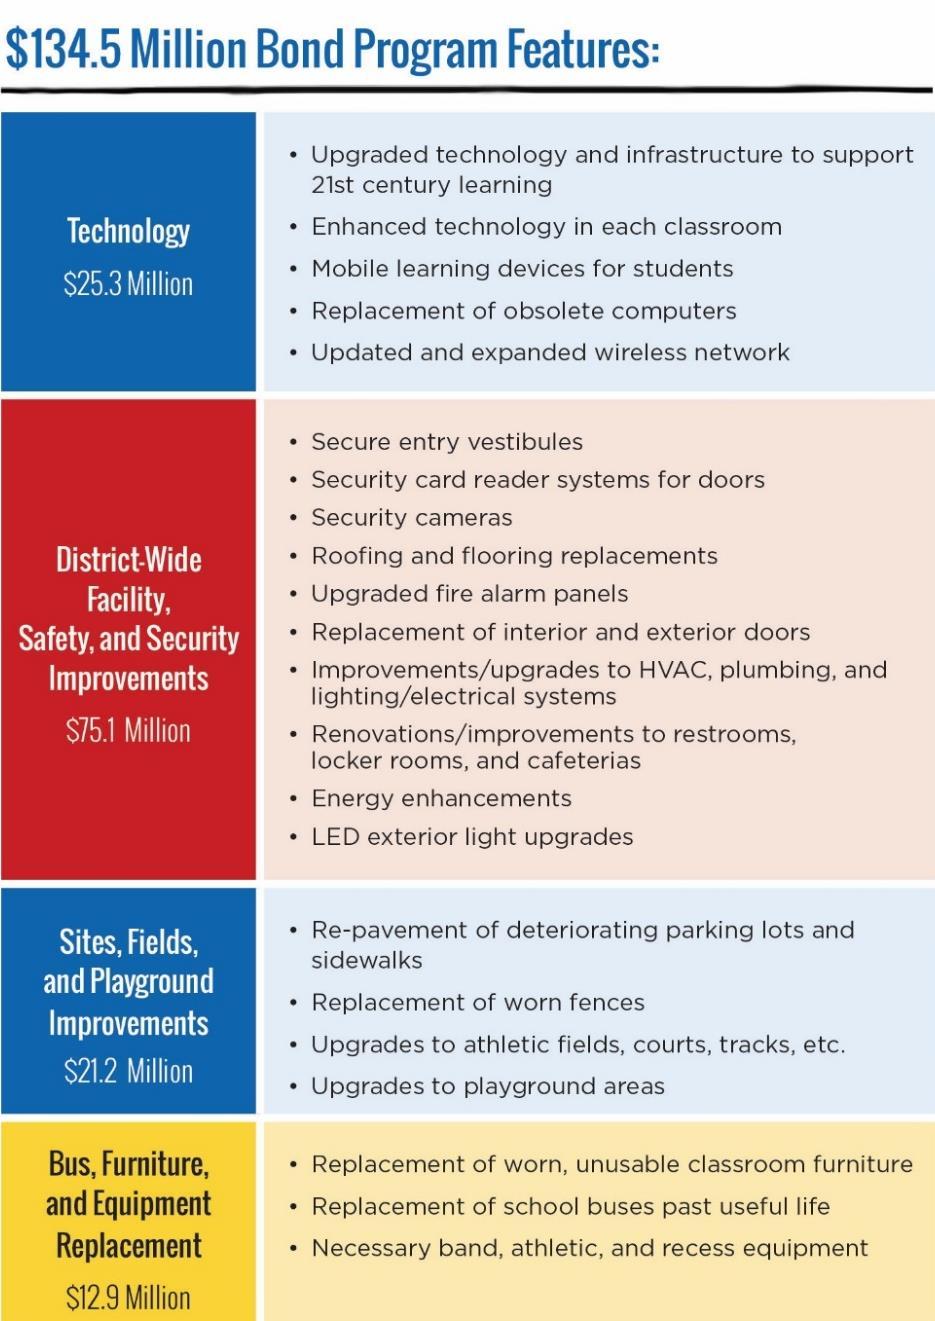 Overview of Bond Benefits of the Bond: Creates modern learning setting Provides school safety and security enhancements Reduces utility costs through environmentally smart upgrades Maintains strong